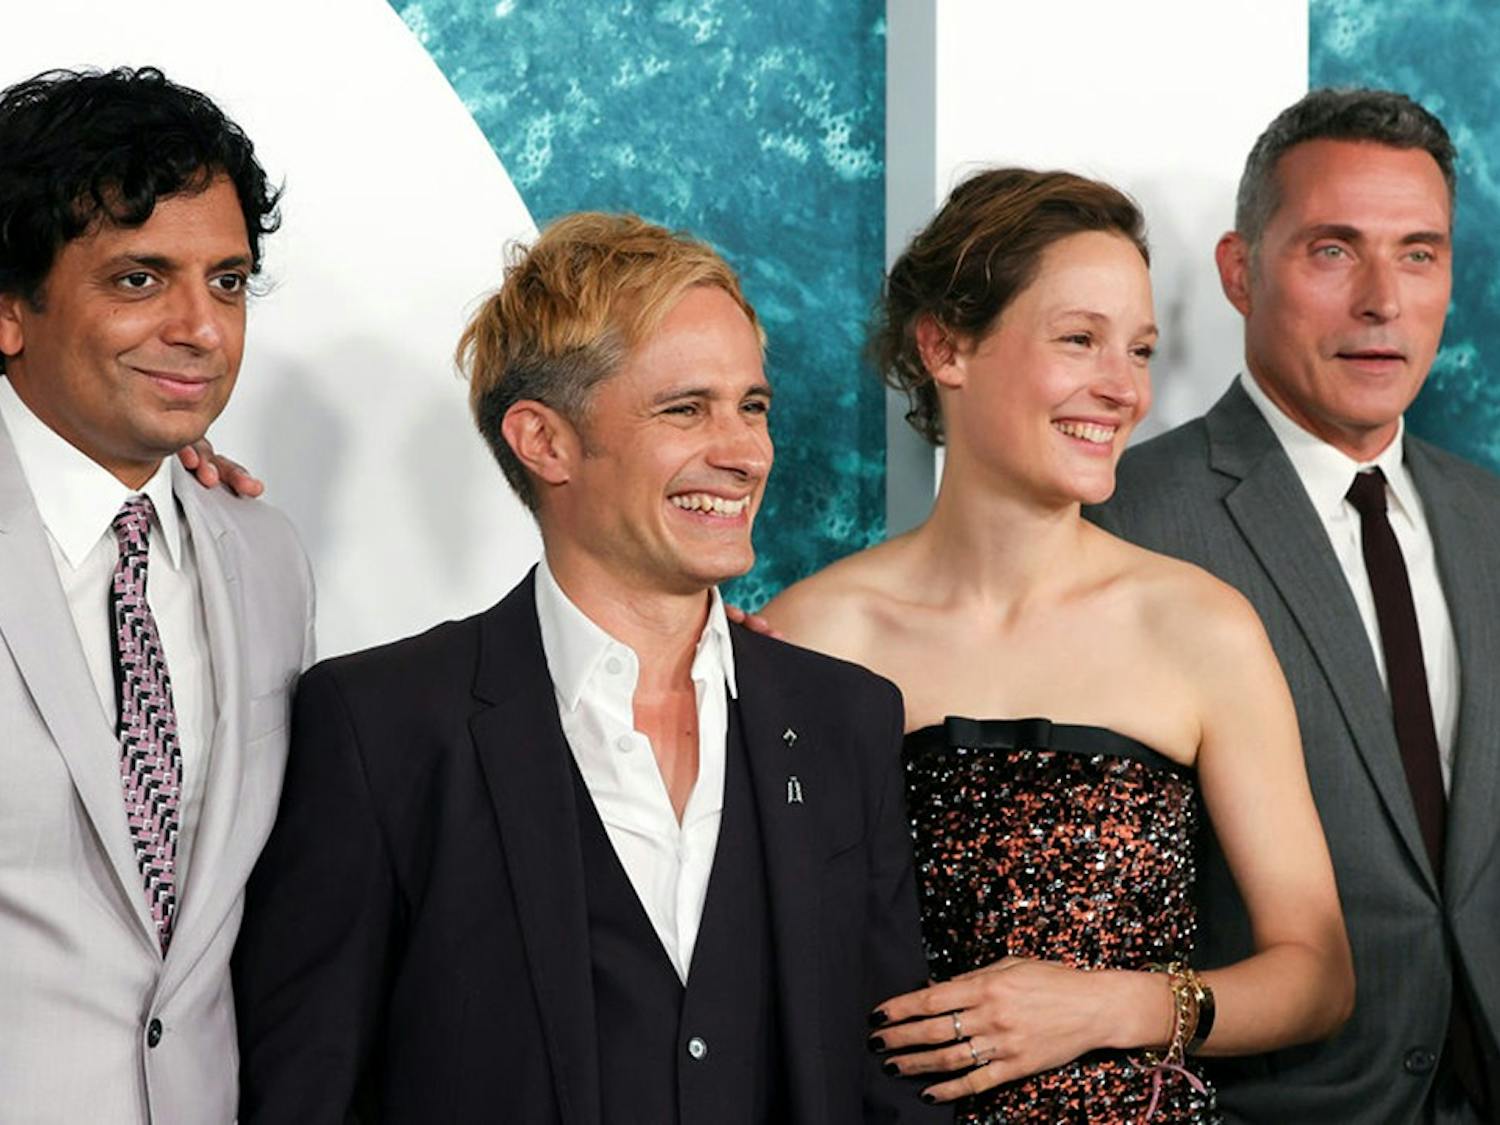 From left to right: M. Night Shyamalan, Gael García Bernal, Vicky Krieps and Rufus Sewell attend the "Old" New York premiere at Jazz at Lincoln Center on July 19, 2021 in New York City. (Dia Dipasupil/Getty Images/TNS)